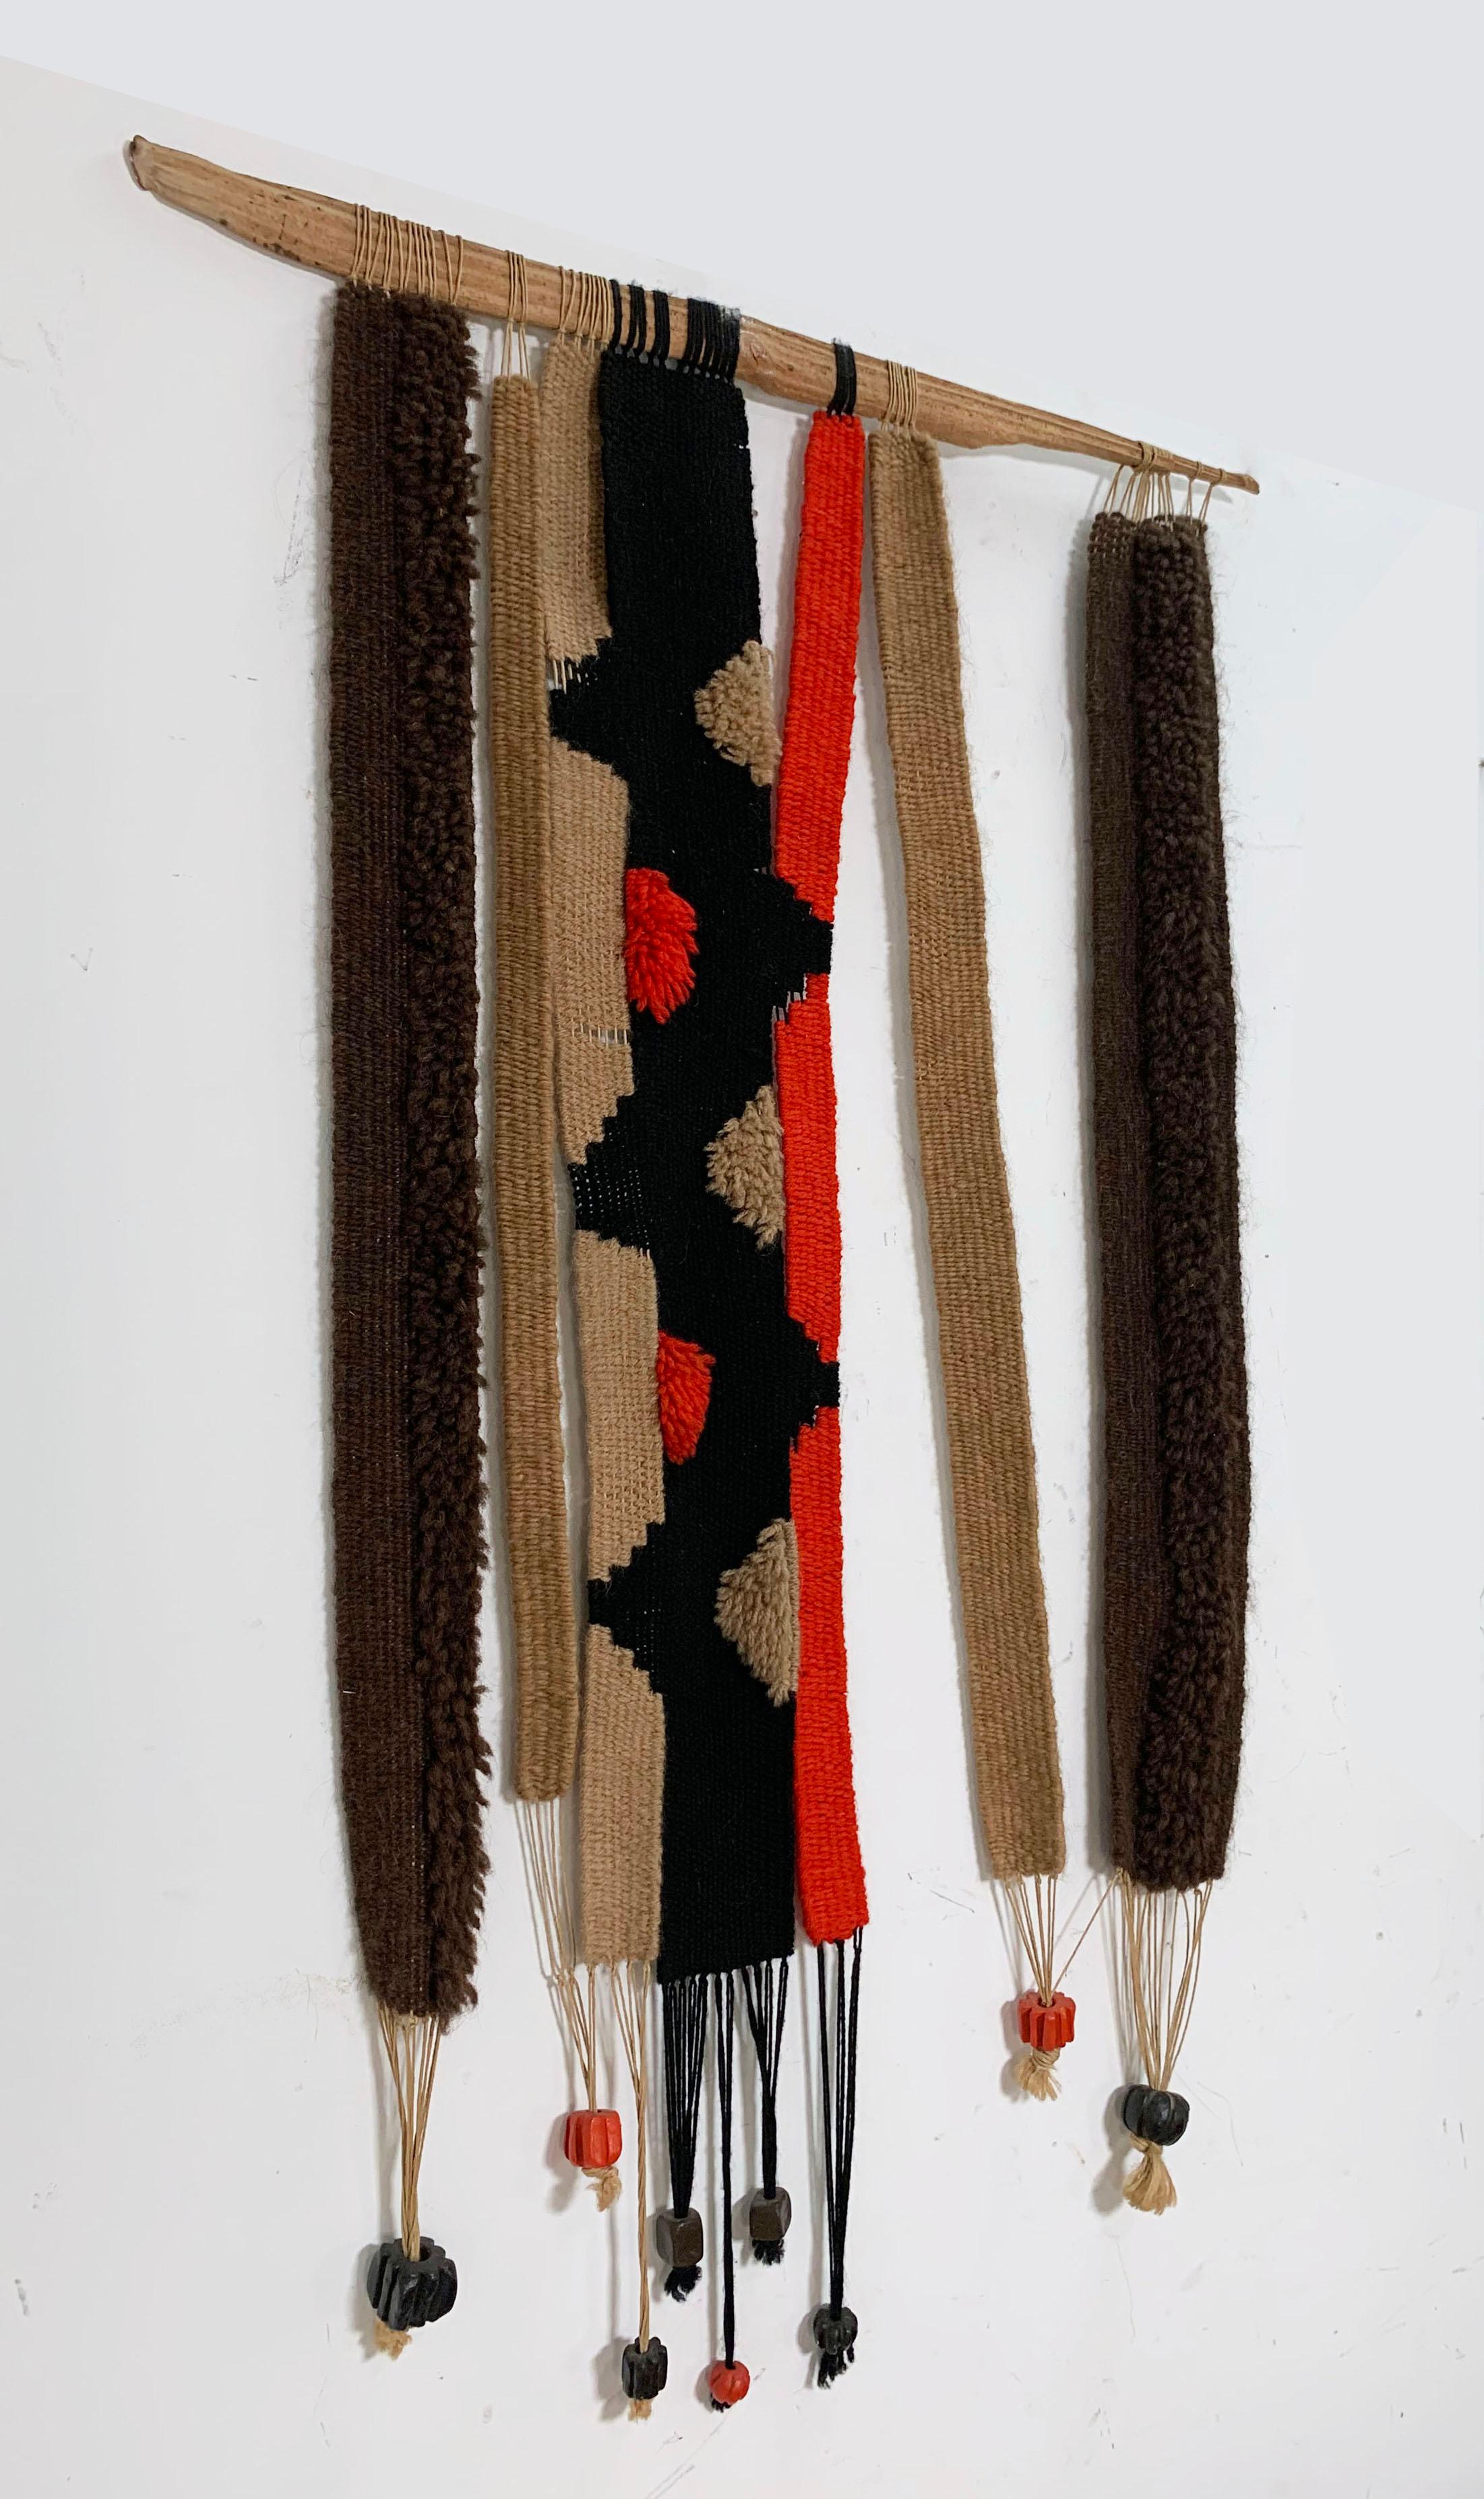 Artist made woven wall hanging of attached panels with oversized ceramic beads on a driftwood hanger, circa 1960s. Artist unknown, although signed with initials.